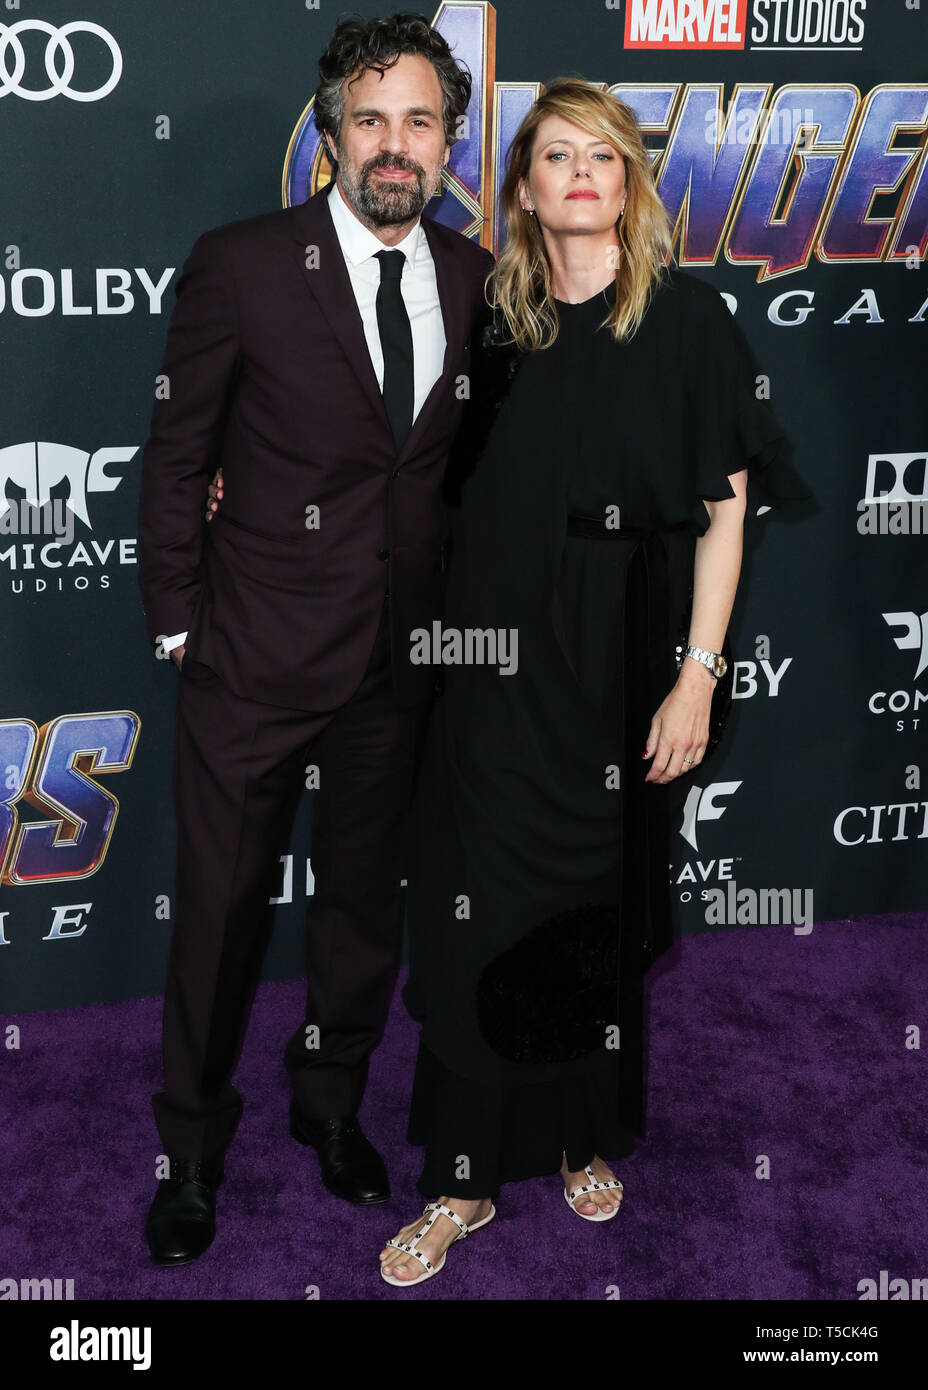 Los Angeles, United States. 22nd Apr, 2019.LOS ANGELES, CALIFORNIA, USA - APRIL 22: Actor Mark Ruffalo and Sunrise Coigney arrive at the World Premiere Of Walt Disney Studios Motion Pictures and Marvel Studios' 'Avengers: Endgame' held at the Los Angeles Convention Center on April 22, 2019 in Los Angeles, California, United States. (Photo by Xavier Collin/Image Press Agency) Credit: Image Press Agency/Alamy Live News Stock Photo